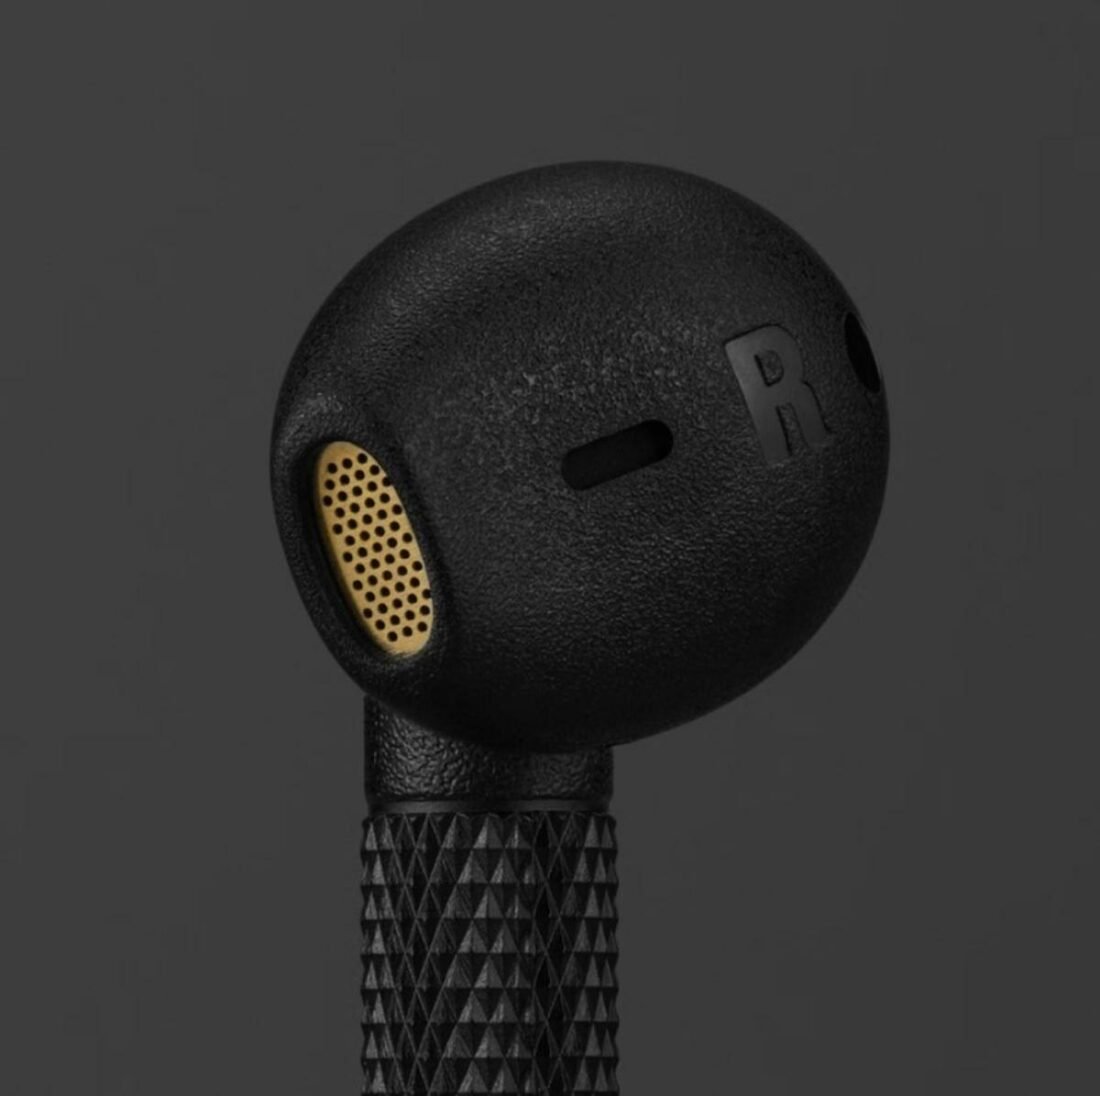 The Marshall Minor IV earbuds features a re-designed earbud and stem. (From: Marshall)